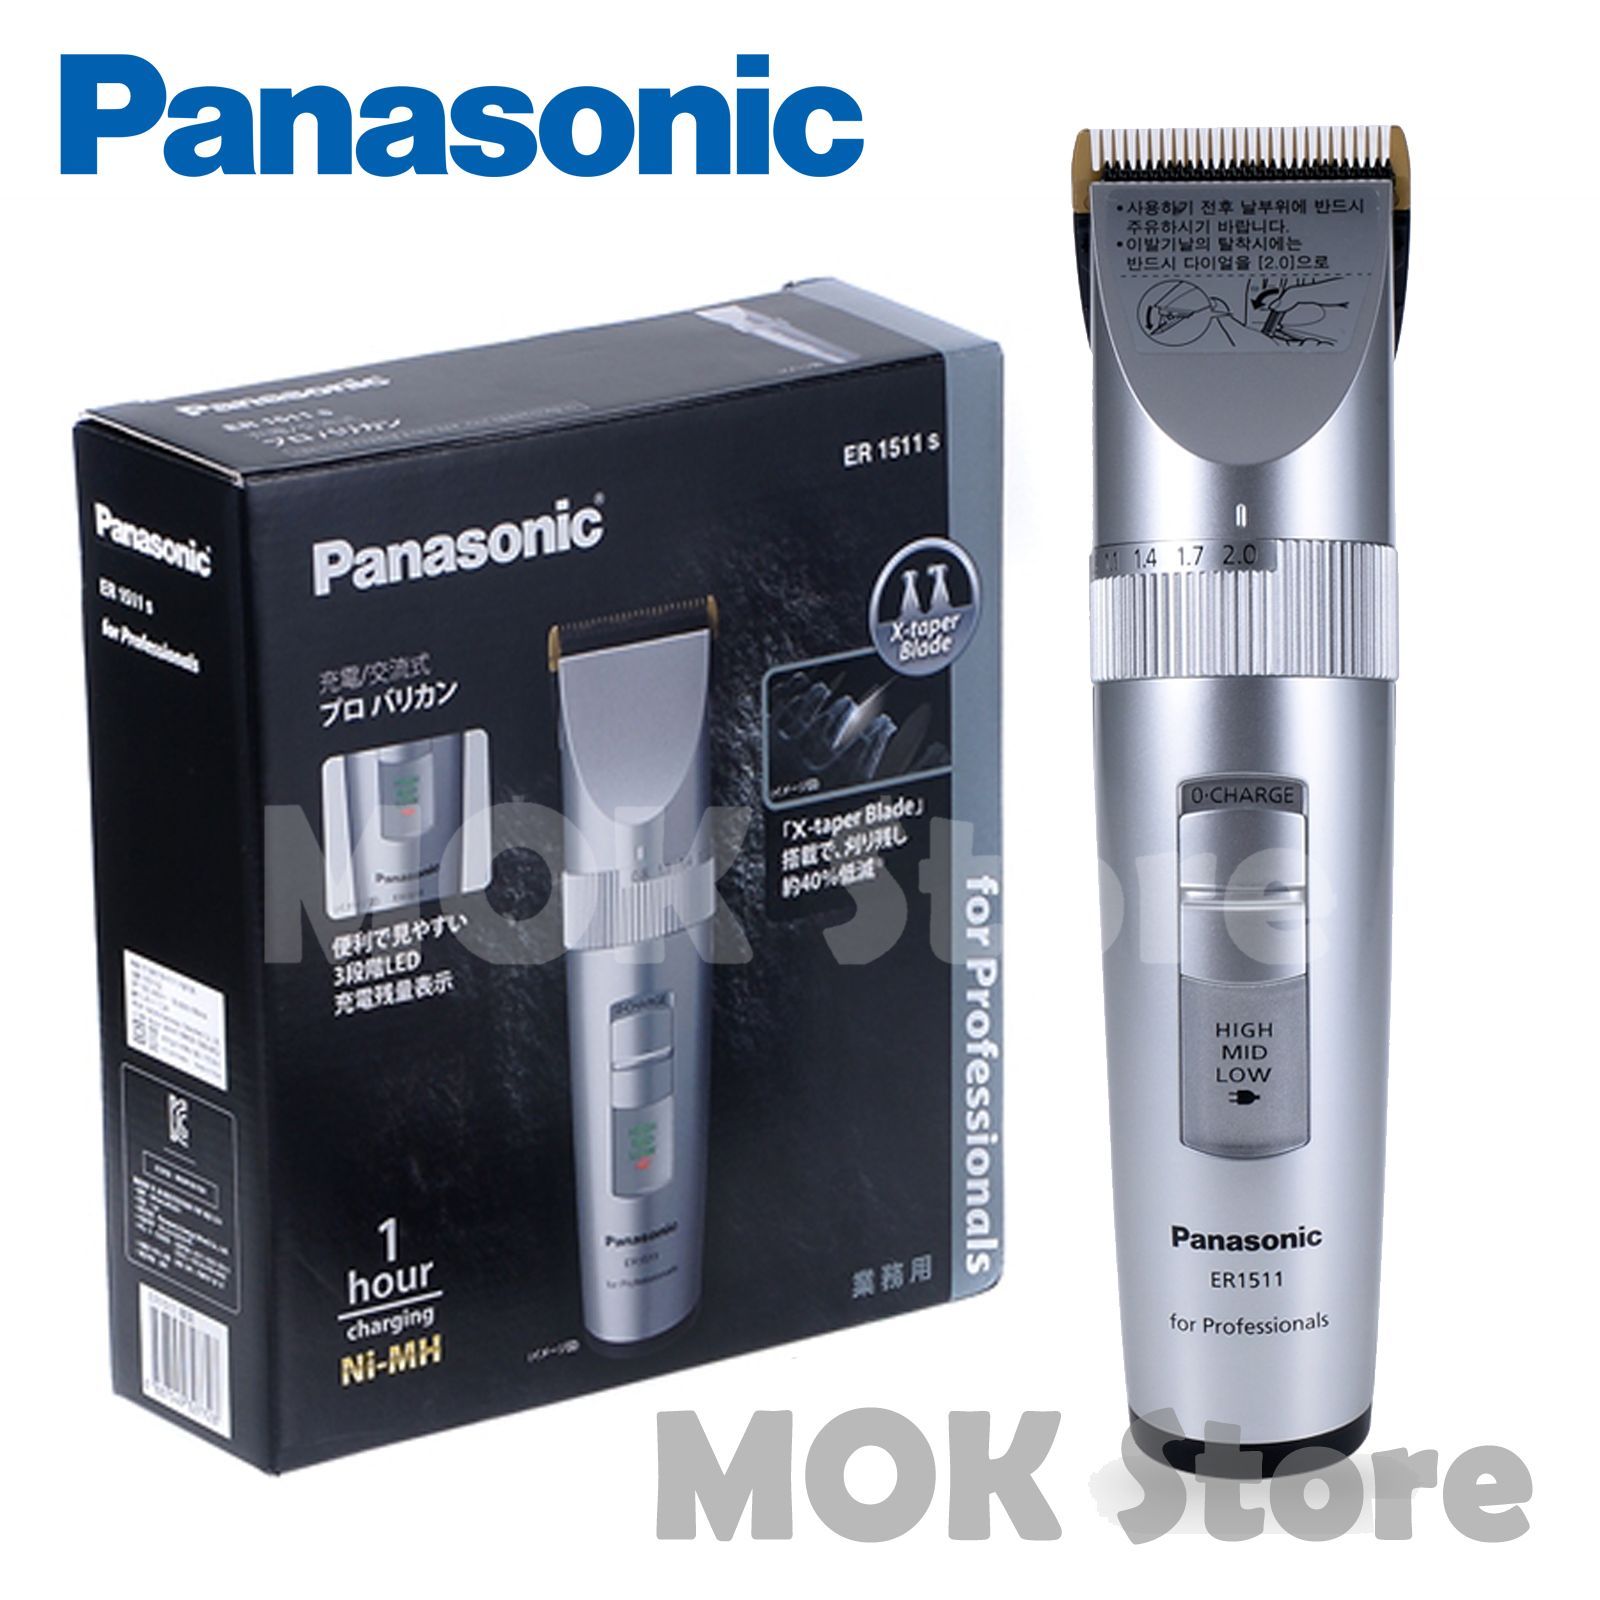 PANASONIC ER1511S Professional Rechargeable Cordless Hair Clippers ...